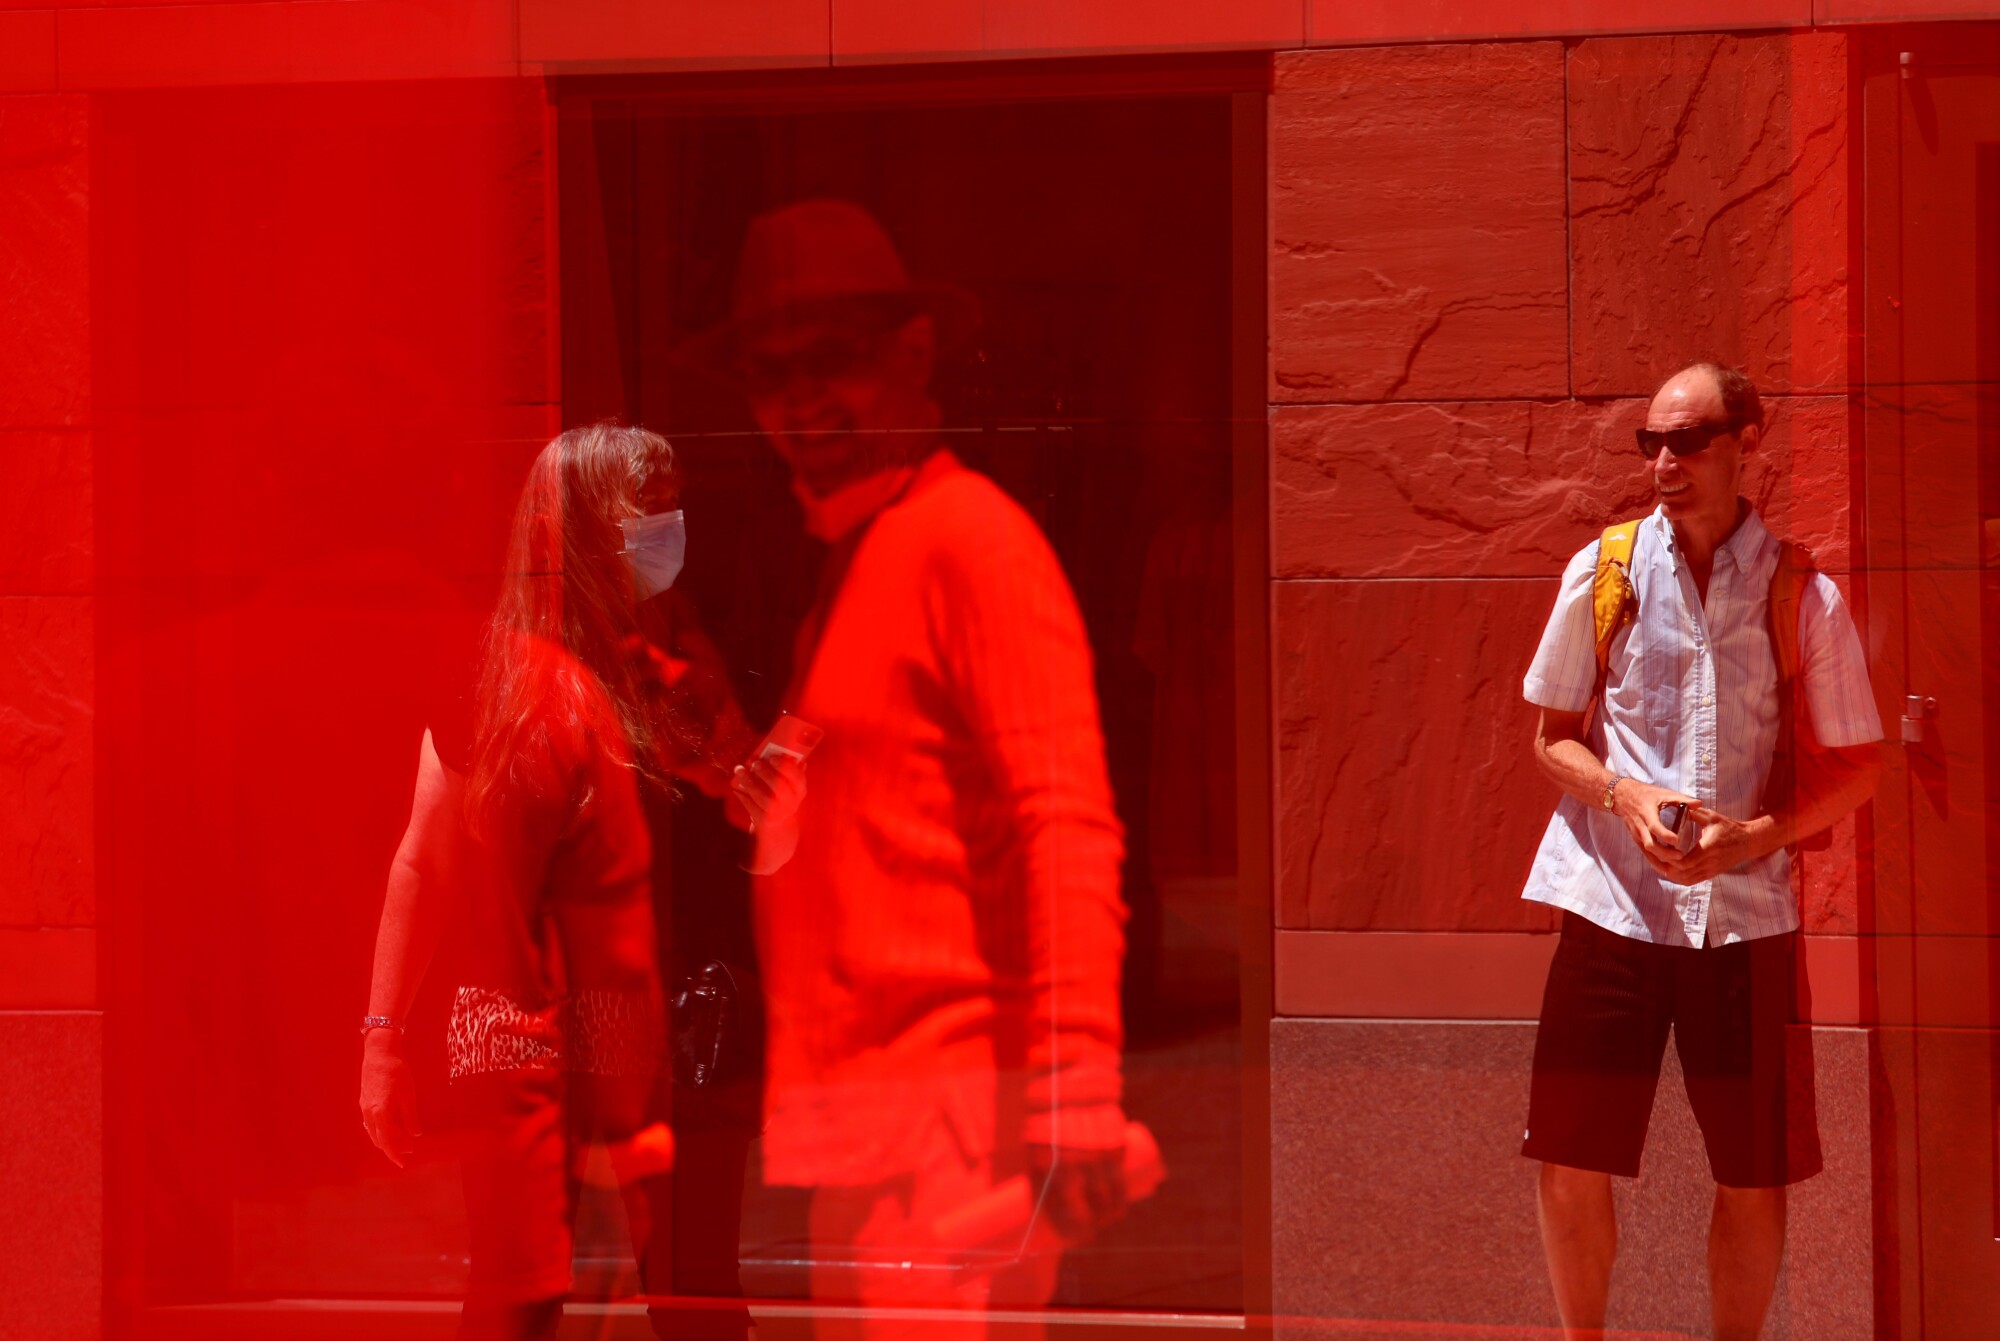 People are reflected on a red surface.